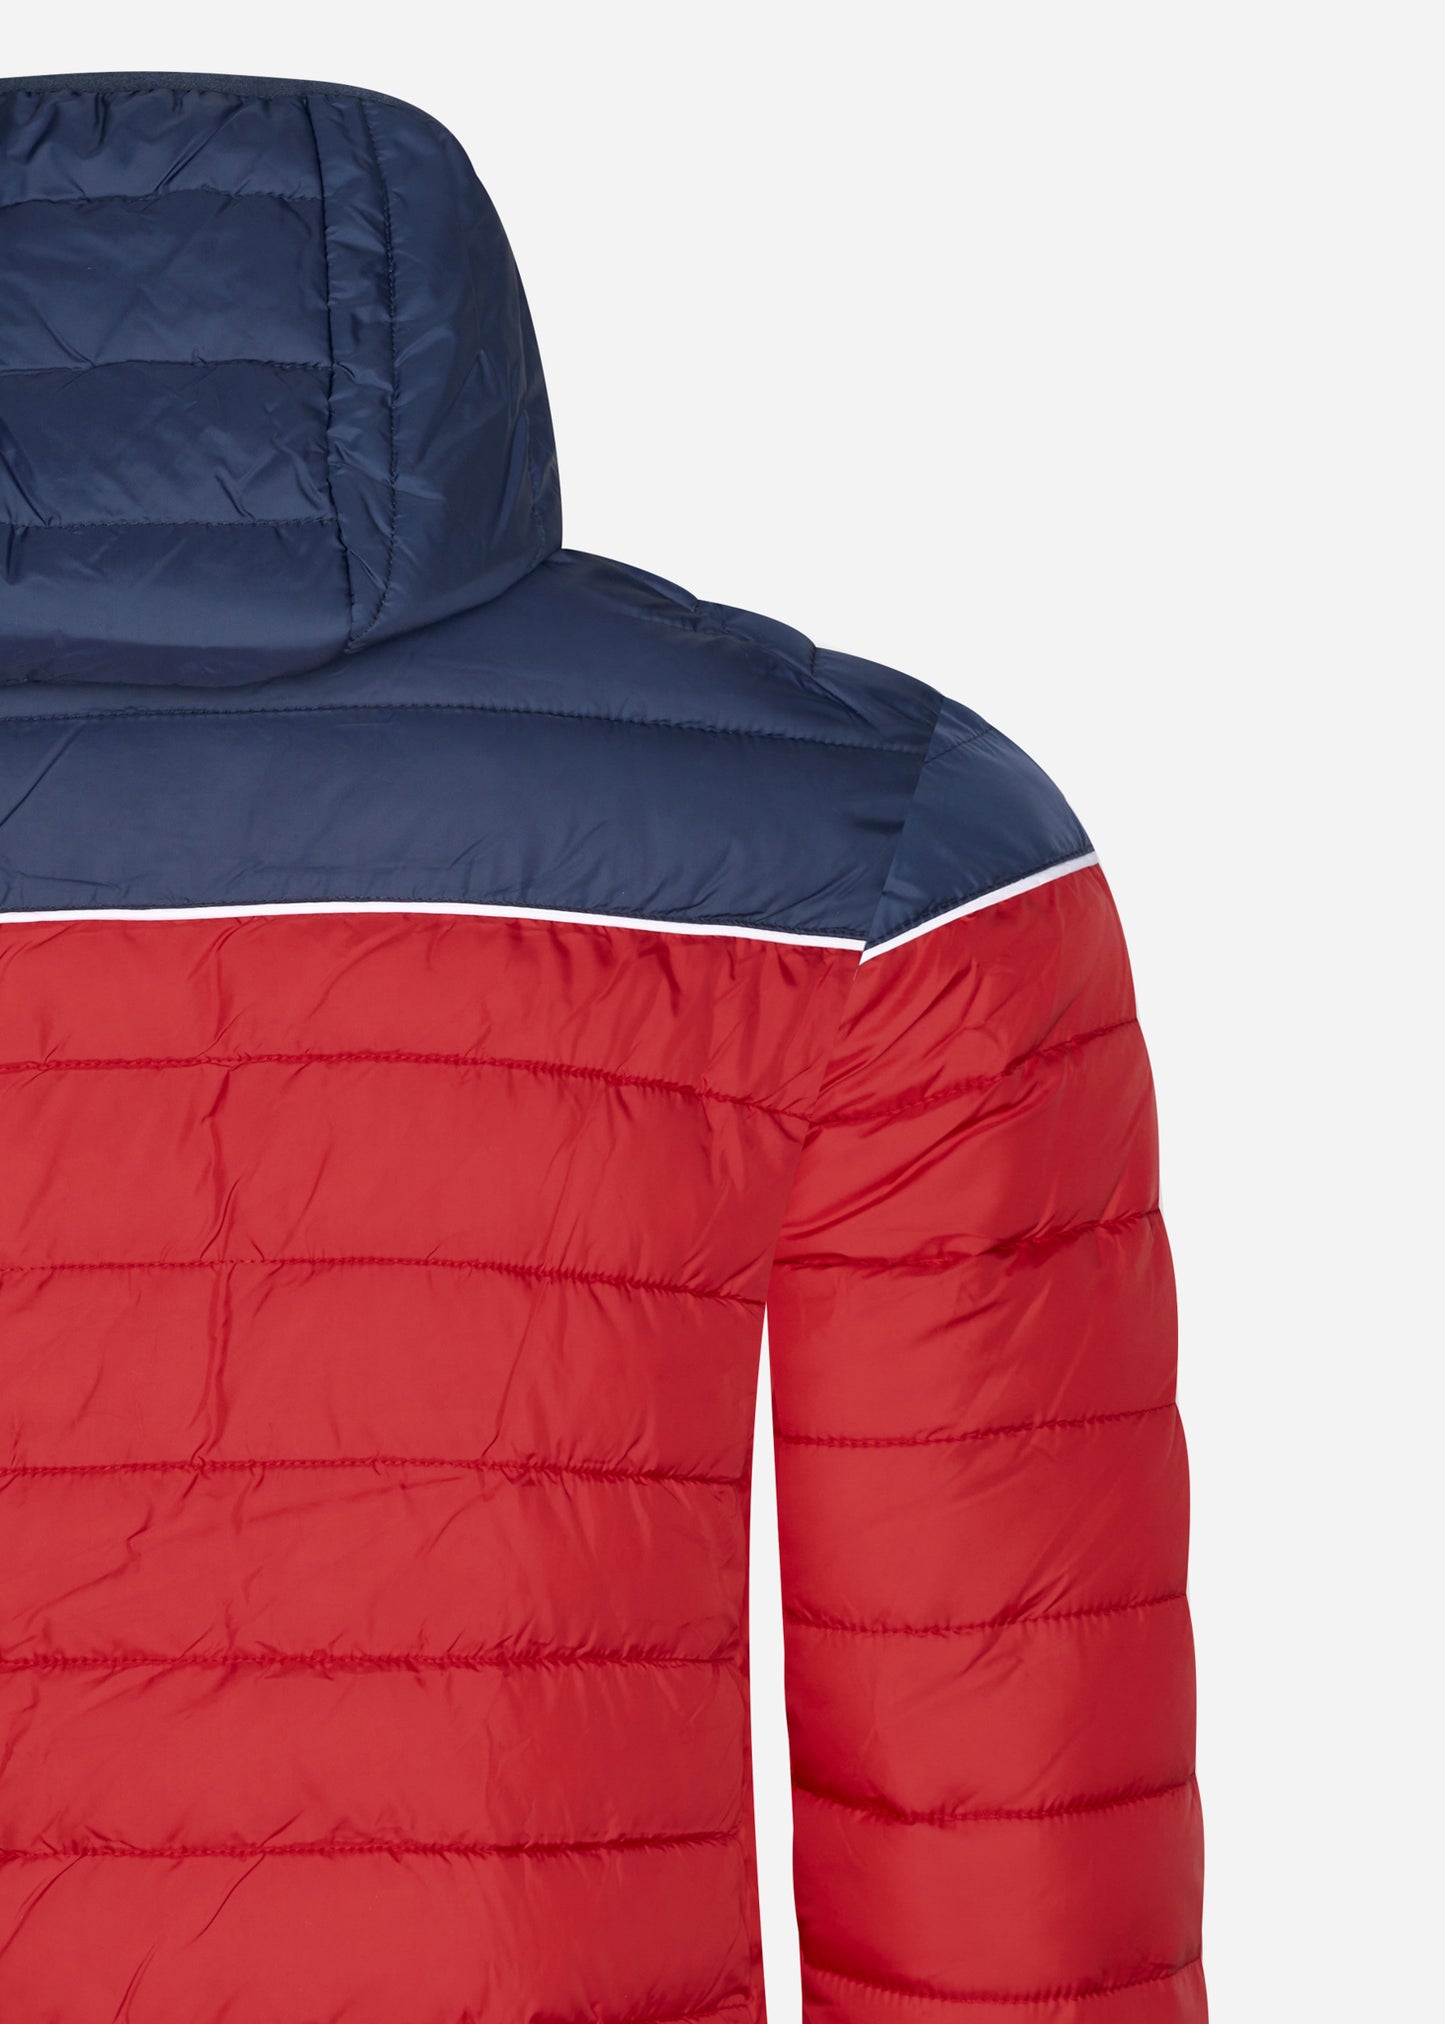 Lombardy 2 padded jacket - red